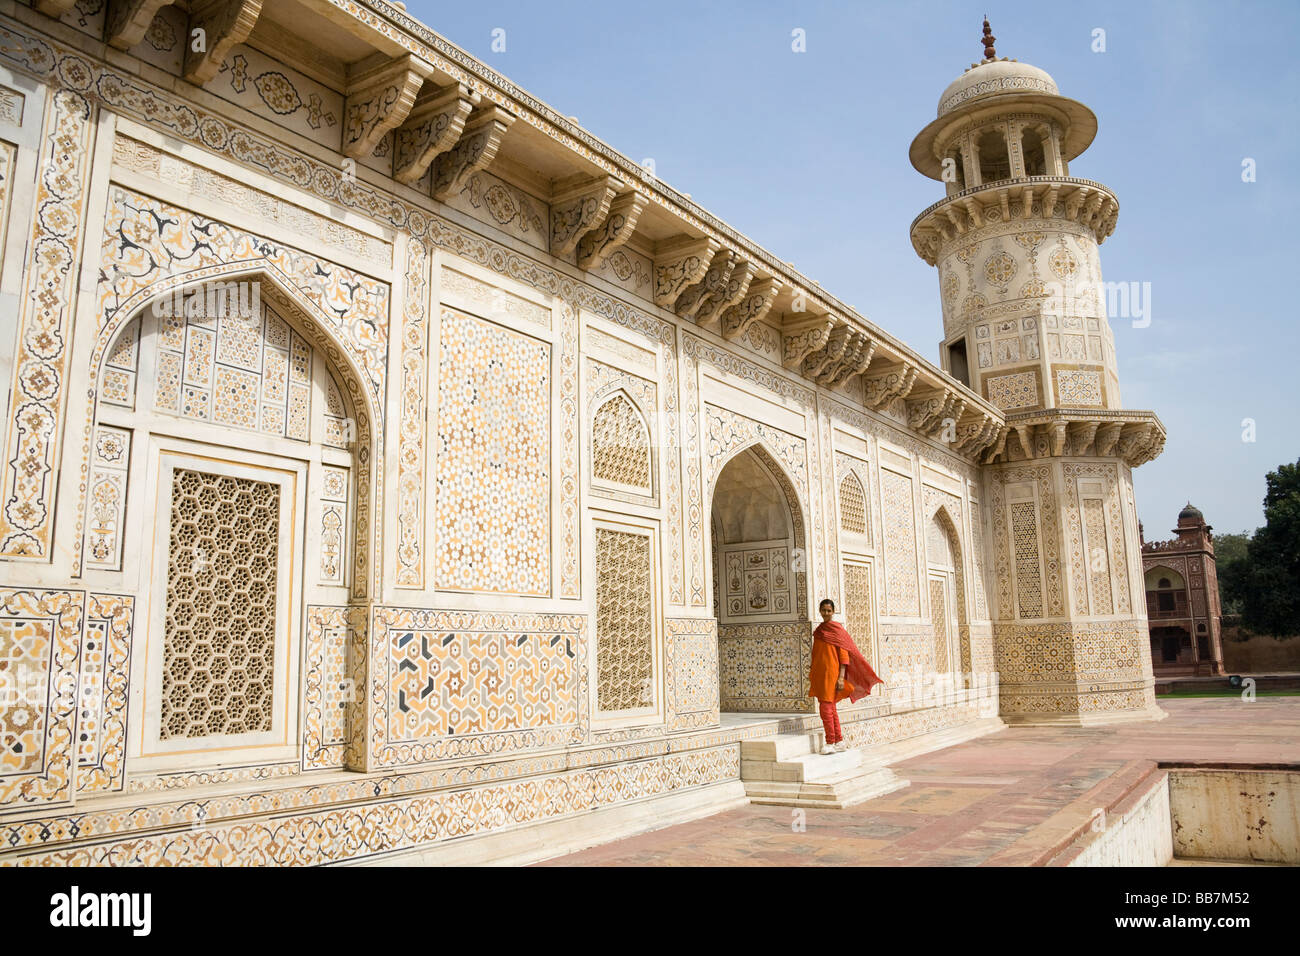 Lady standing on steps of the Itimad-ud-Daulah mausoleum, also known as the Baby Taj, Agra, Uttar Pradesh, India Stock Photo